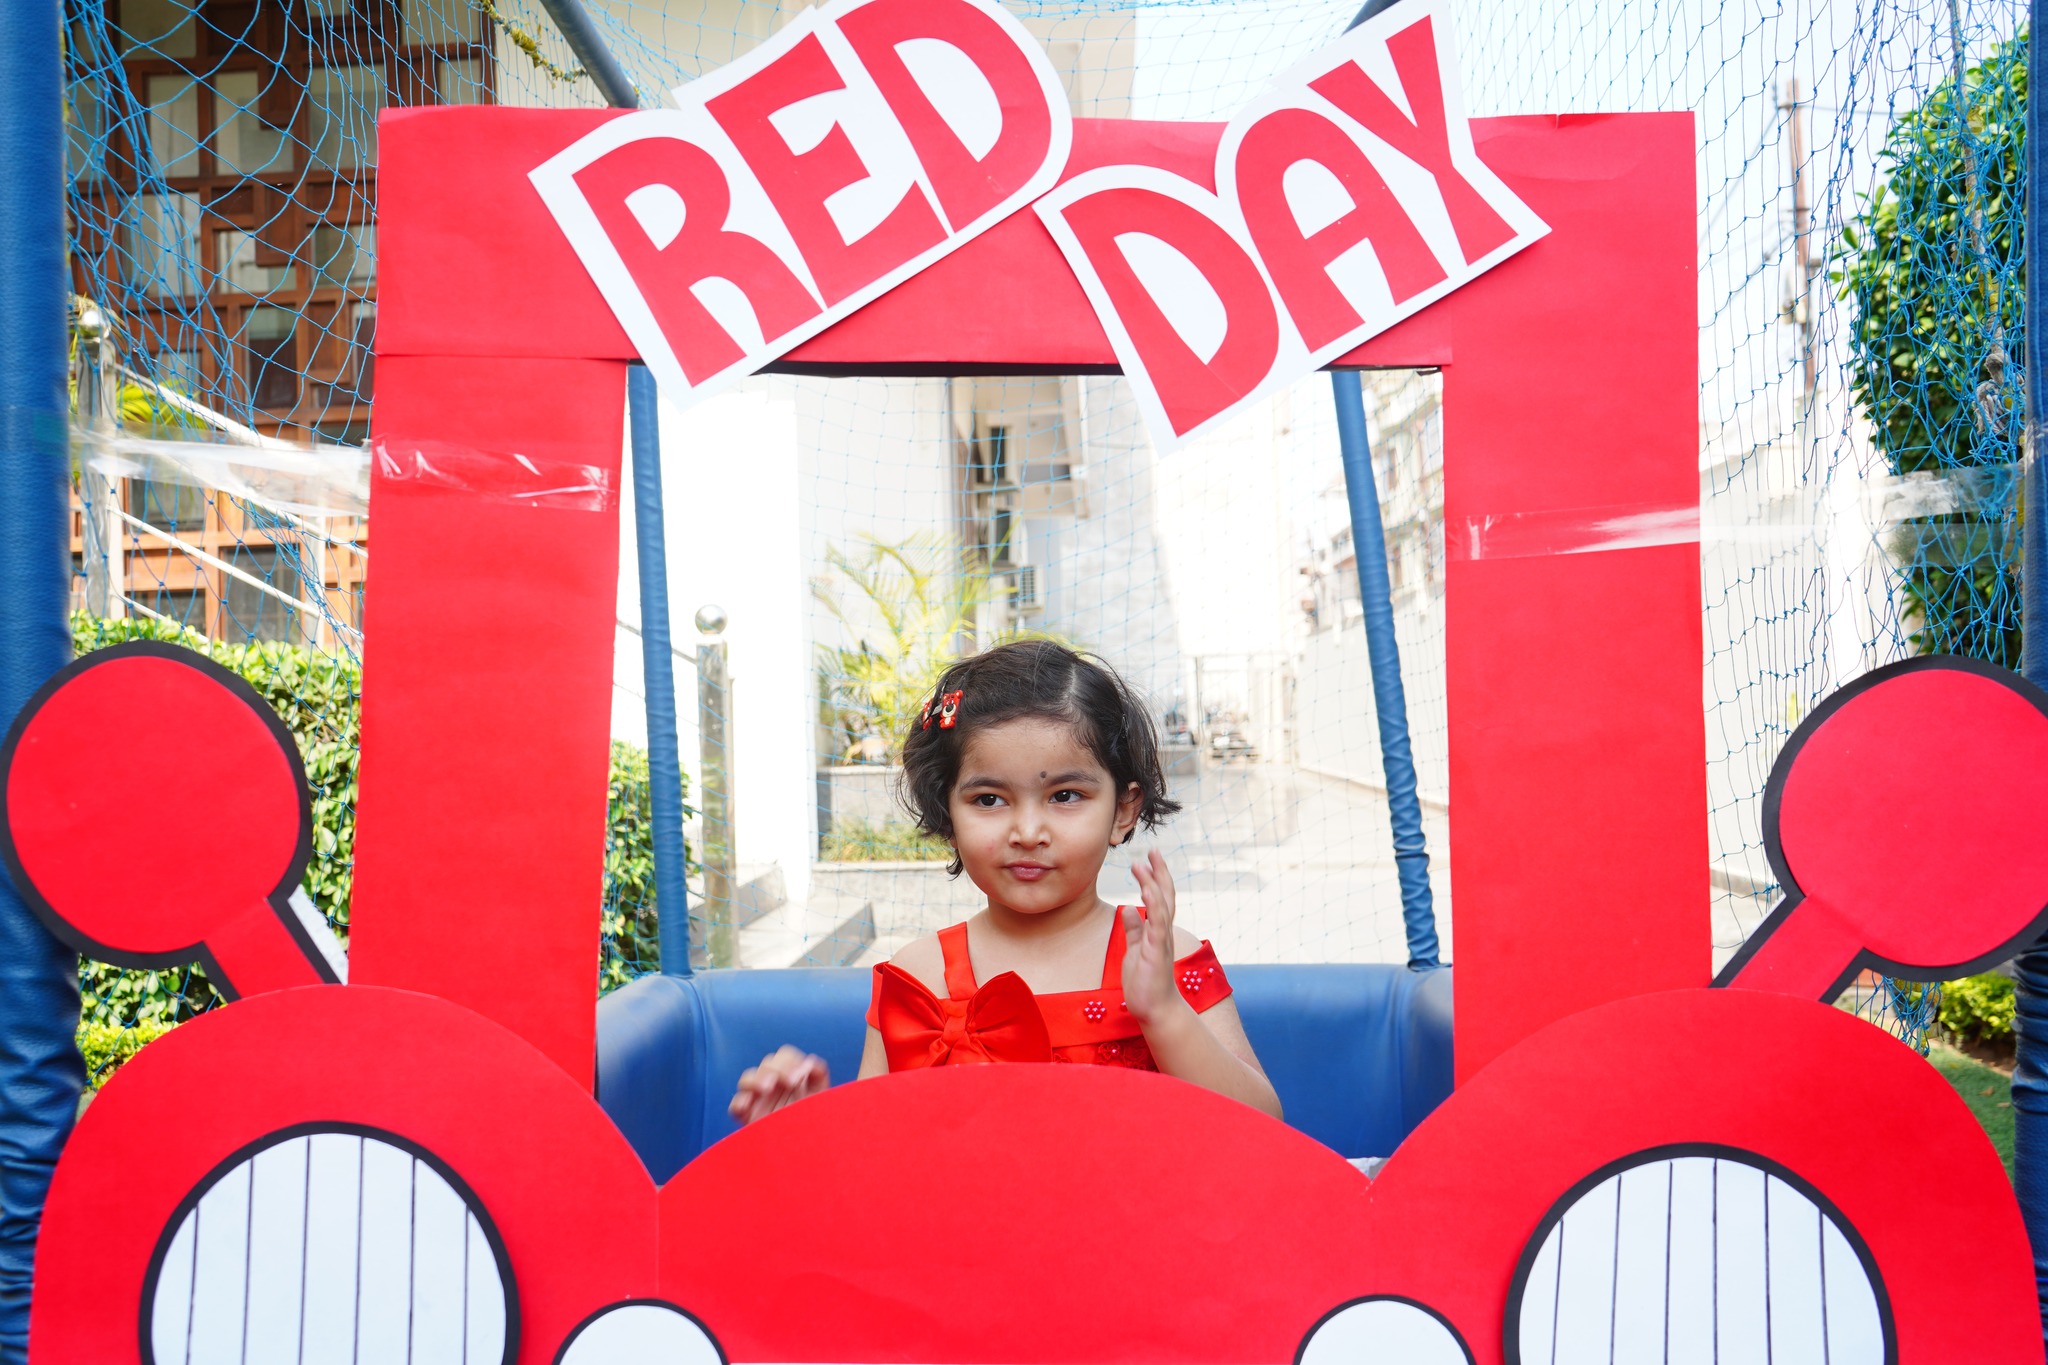 RED DAY